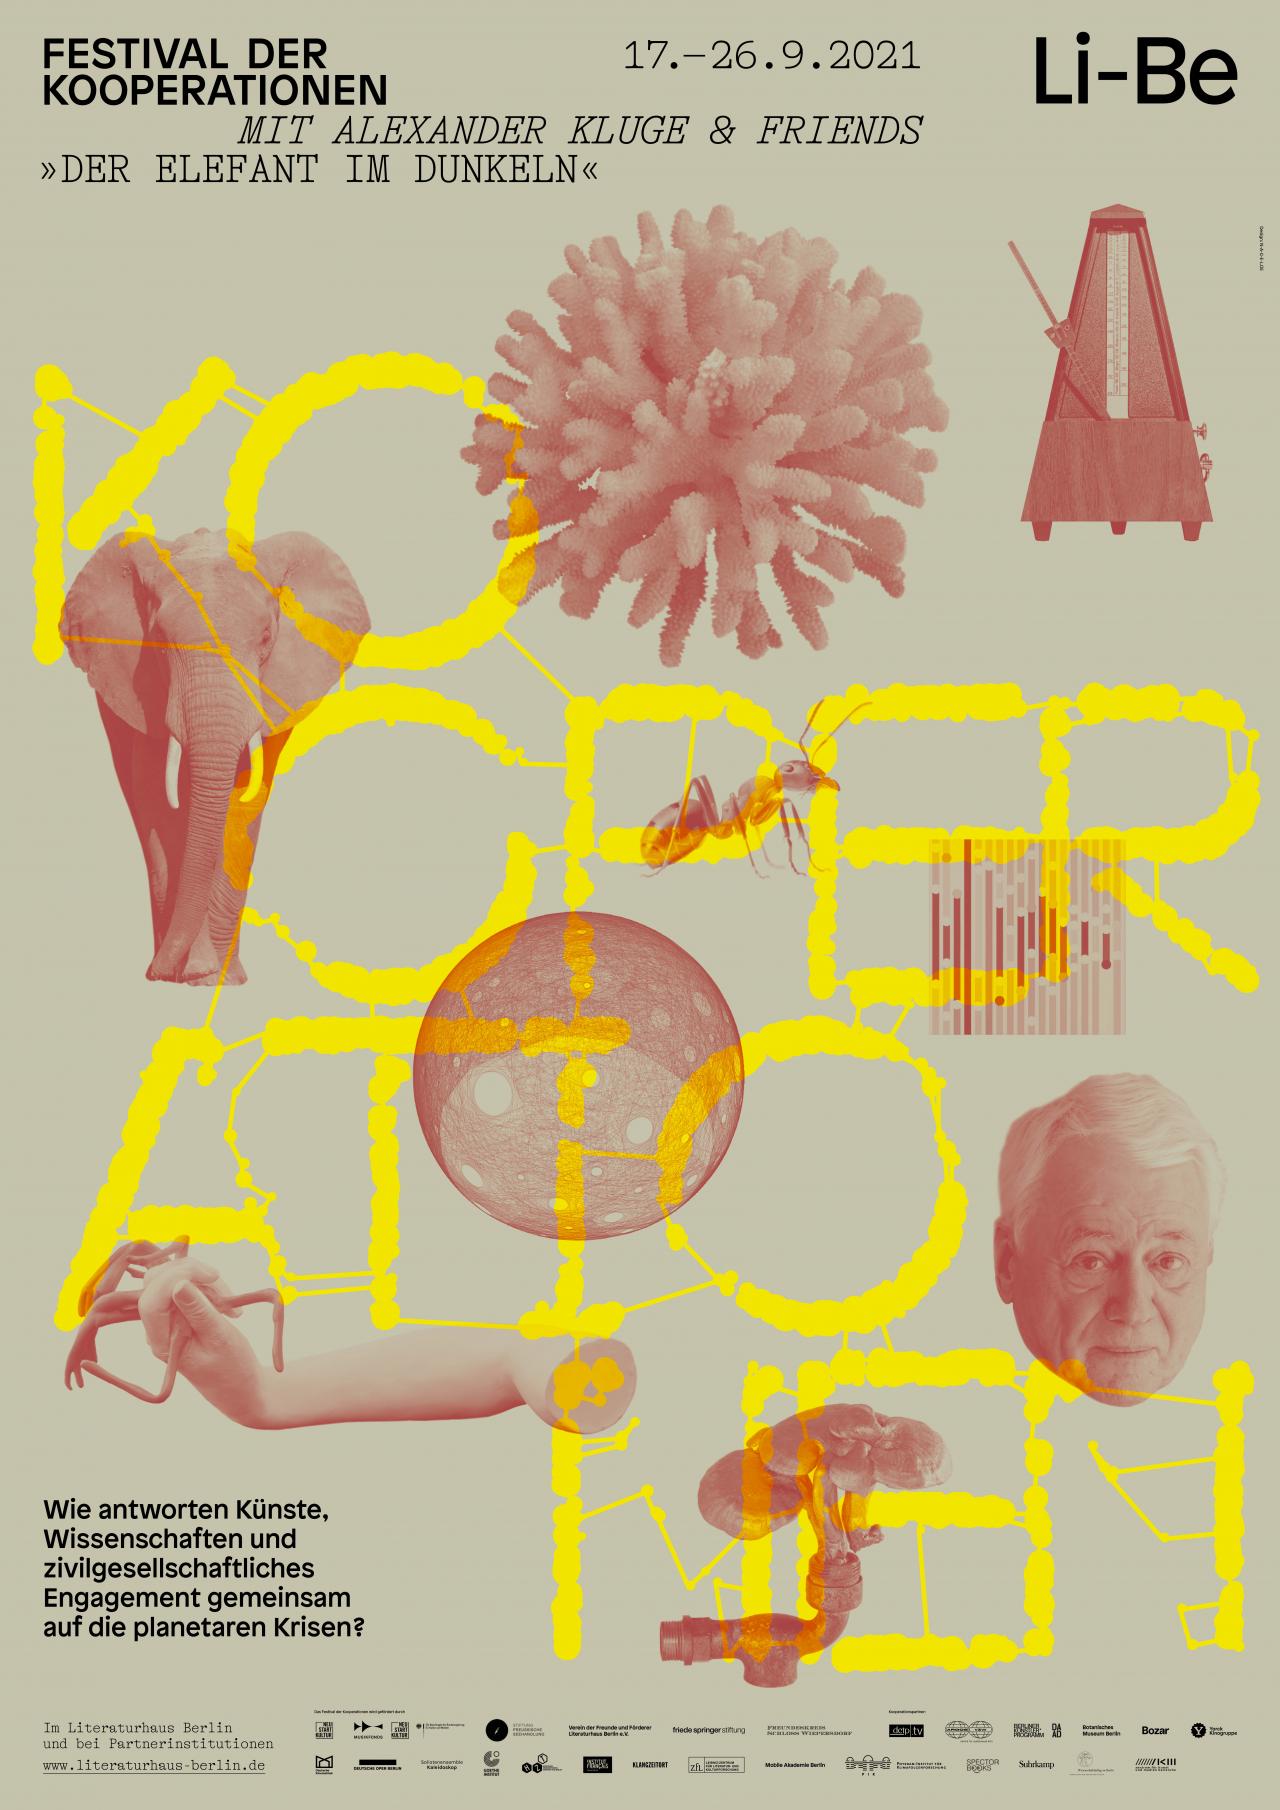 One poster shows an elephant from the front, a coral, an ant, a man's head, a tube from which a mushroom or a cloud is drawn. It is written in between: "Kooperationen". Top left: "Festival der Kooperationen"